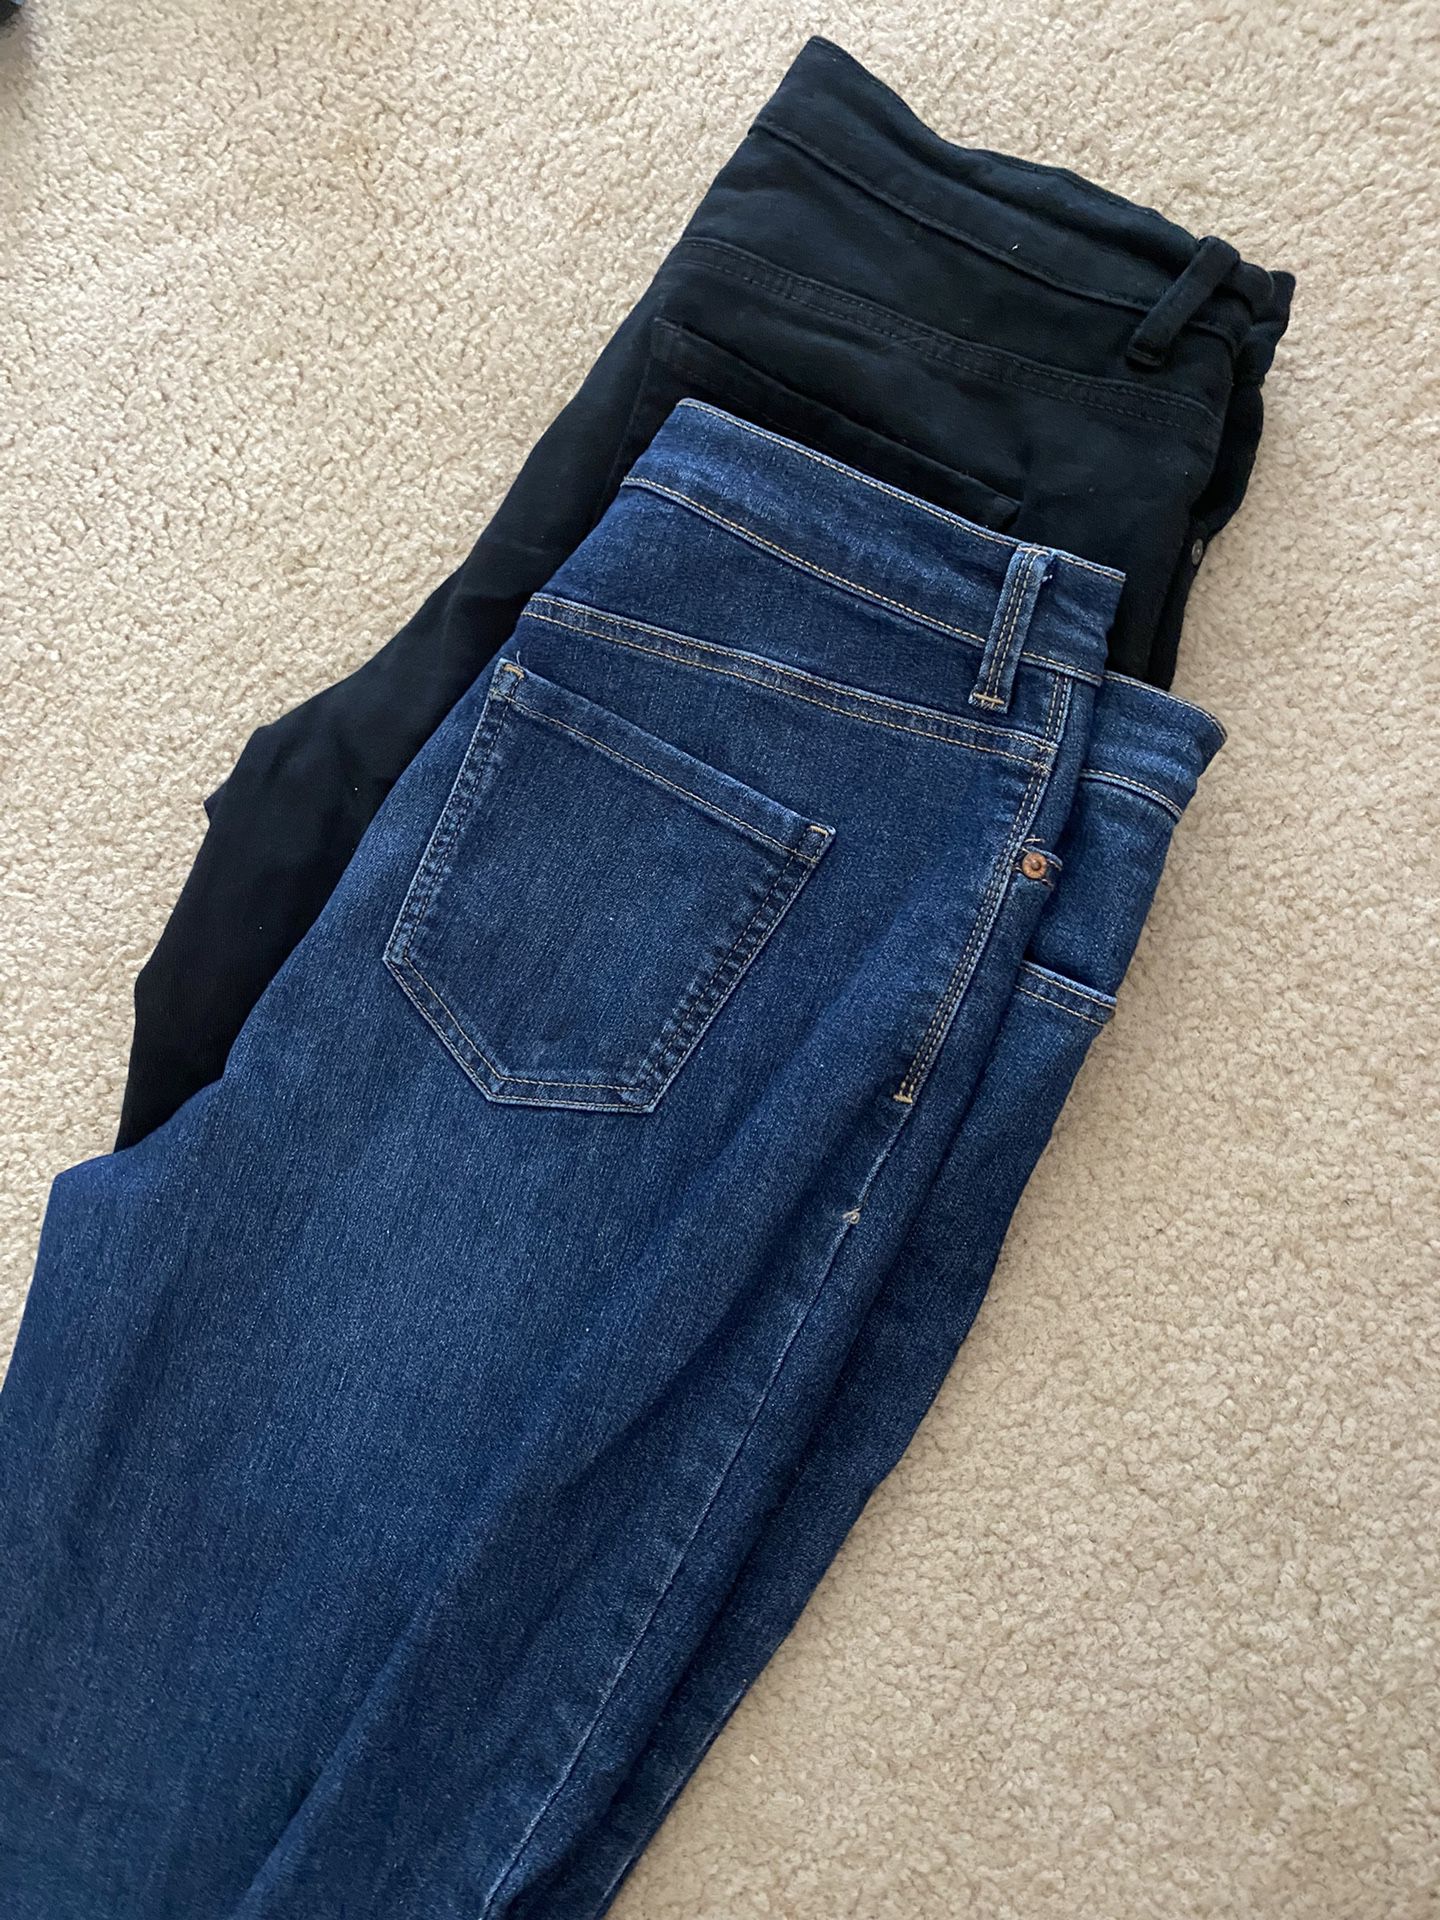 Women’s Sz 12 Jeans And Pencil Skirt 